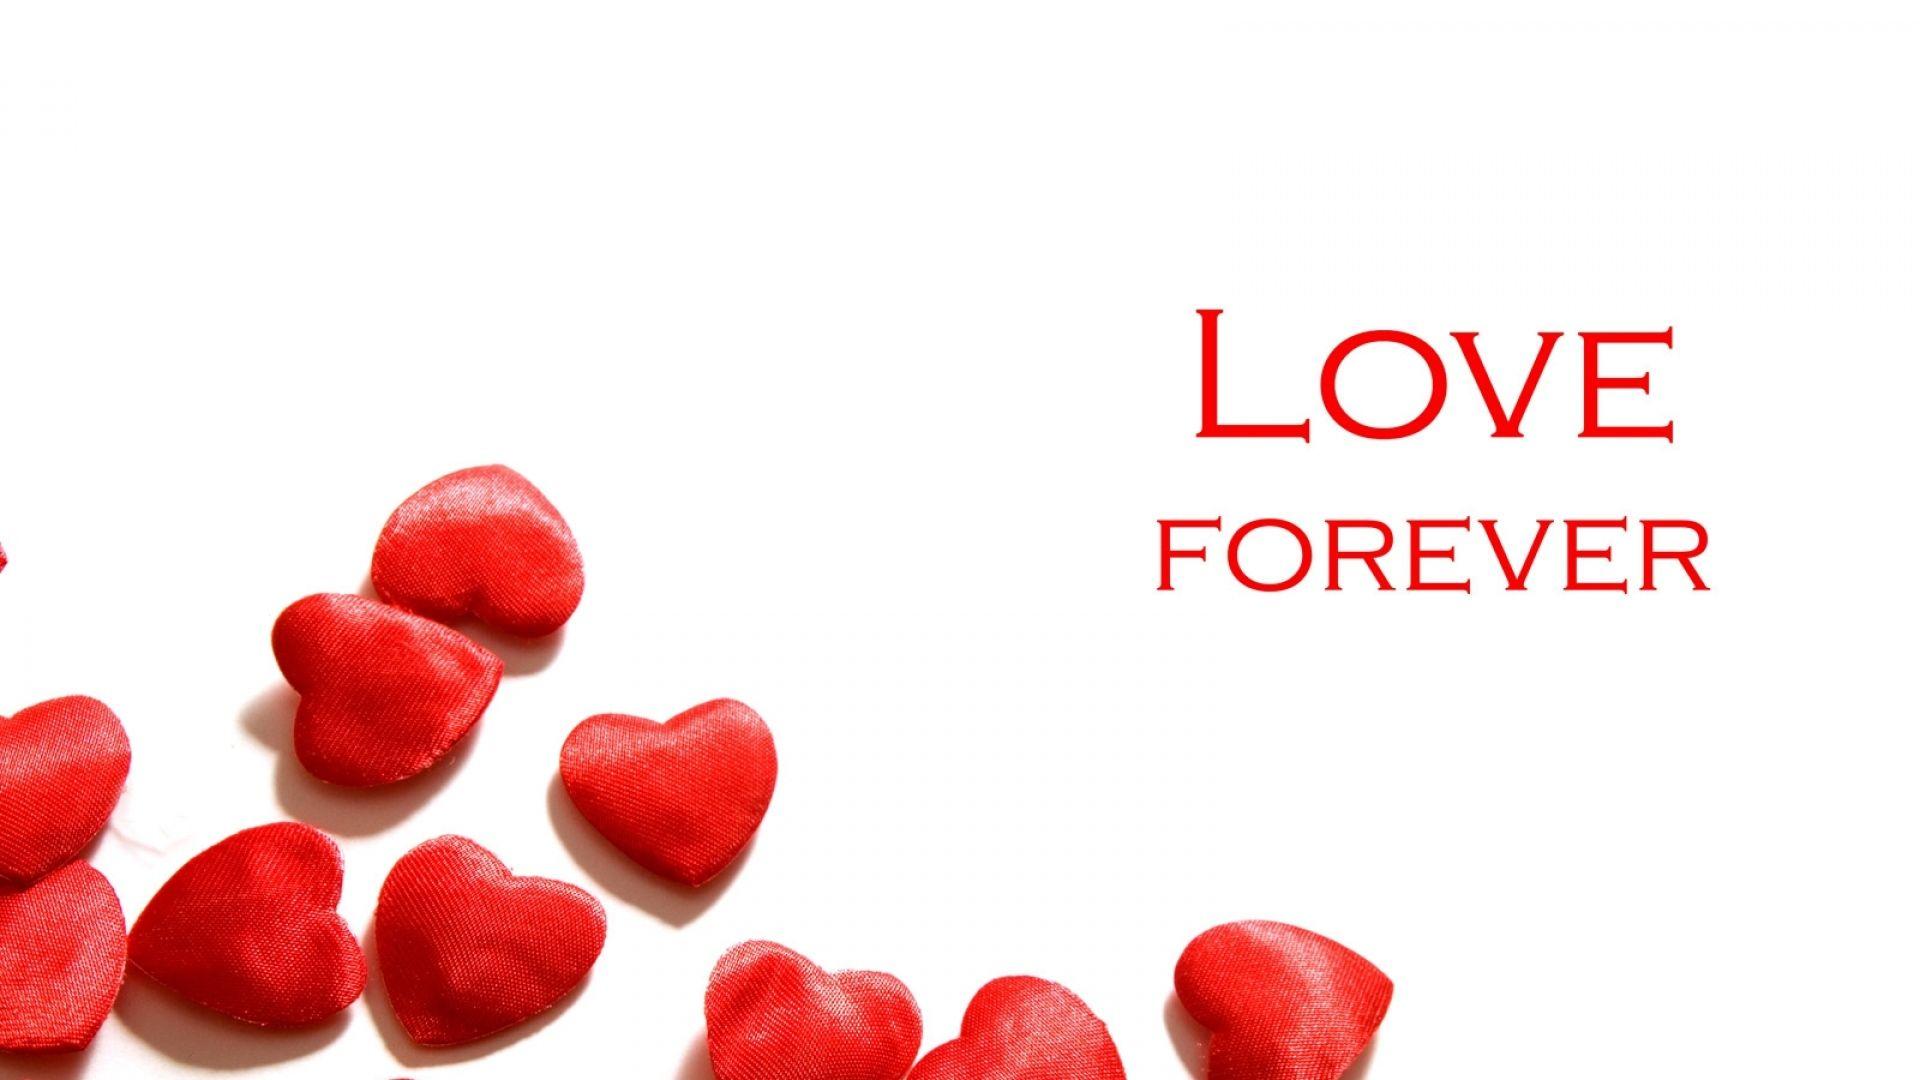 Love Forever Wallpapers Top Free Love Forever Backgrounds Wallpaperaccess